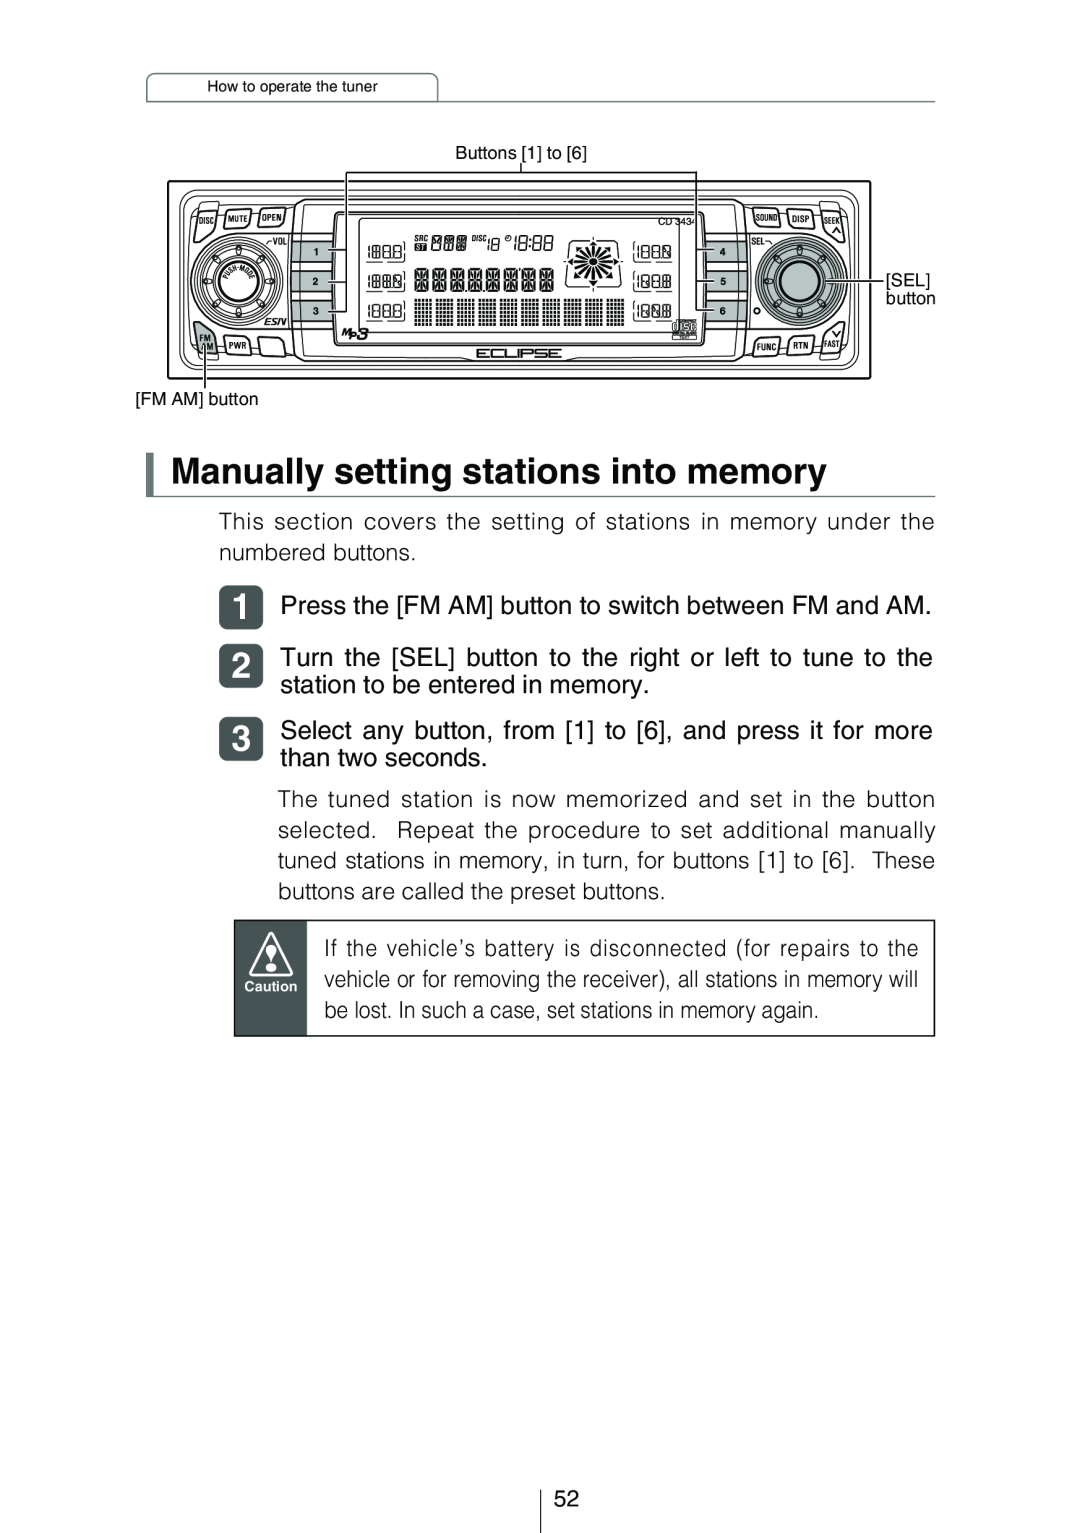 Eclipse - Fujitsu Ten CD3434 Manually setting stations into memory, Press the FM AM button to switch between FM and AM 